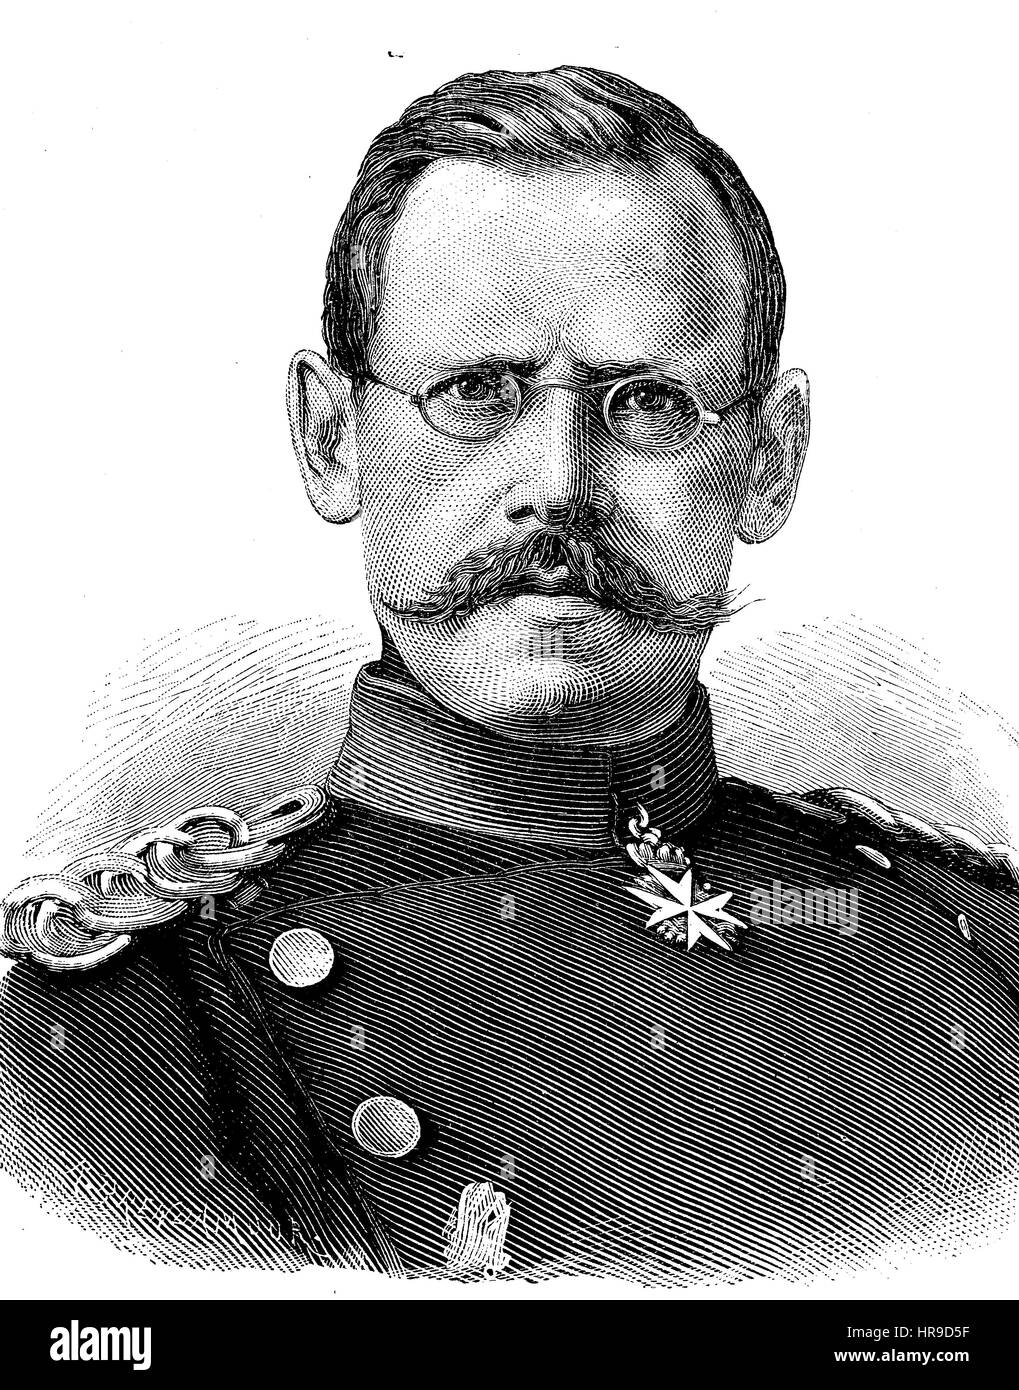 Heinrich Karl Ludwig Adolf von Gluemer, 1814 - 1896, was a Prussian officer, most recently General of the infantry, Situation from the time of The Franco-Prussian War or Franco-German War,  Deutsch-Franzoesischer Krieg, 1870-1871, Reproduction of an original woodcut from the year 1885, digital improved Stock Photo